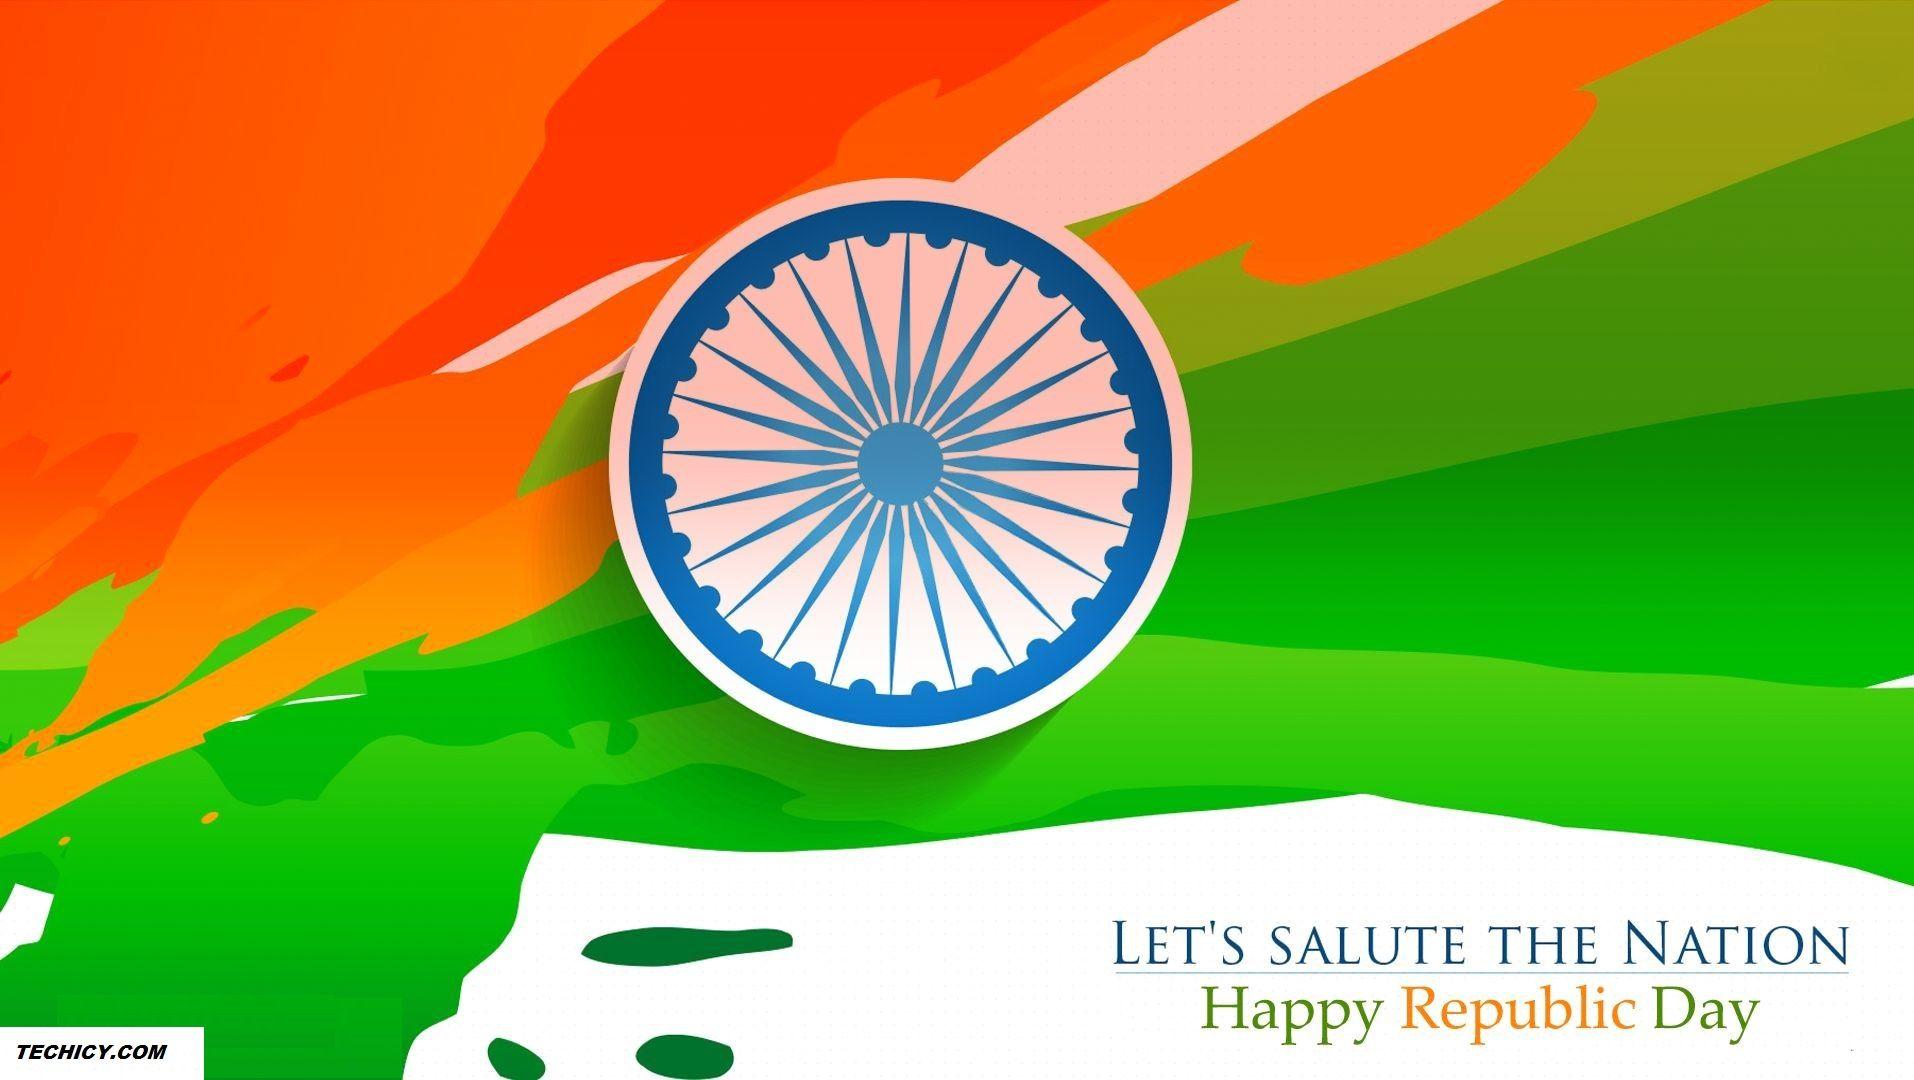 Best Republic Day HD Image and Wallpaper for You {Free Download